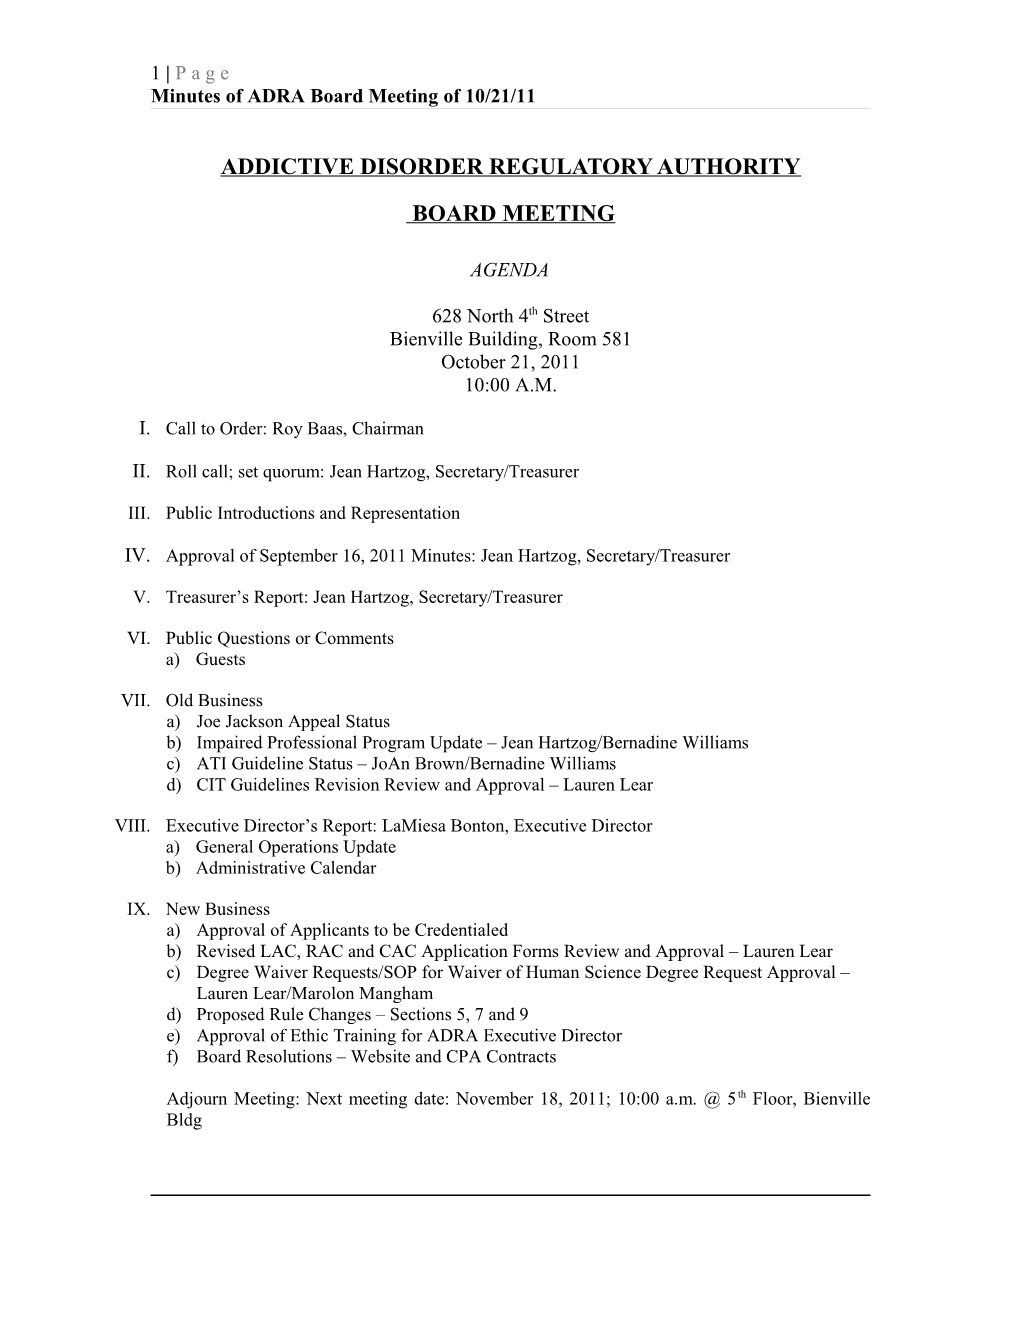 Minutes of ADRA Board Meeting of 10/21/11